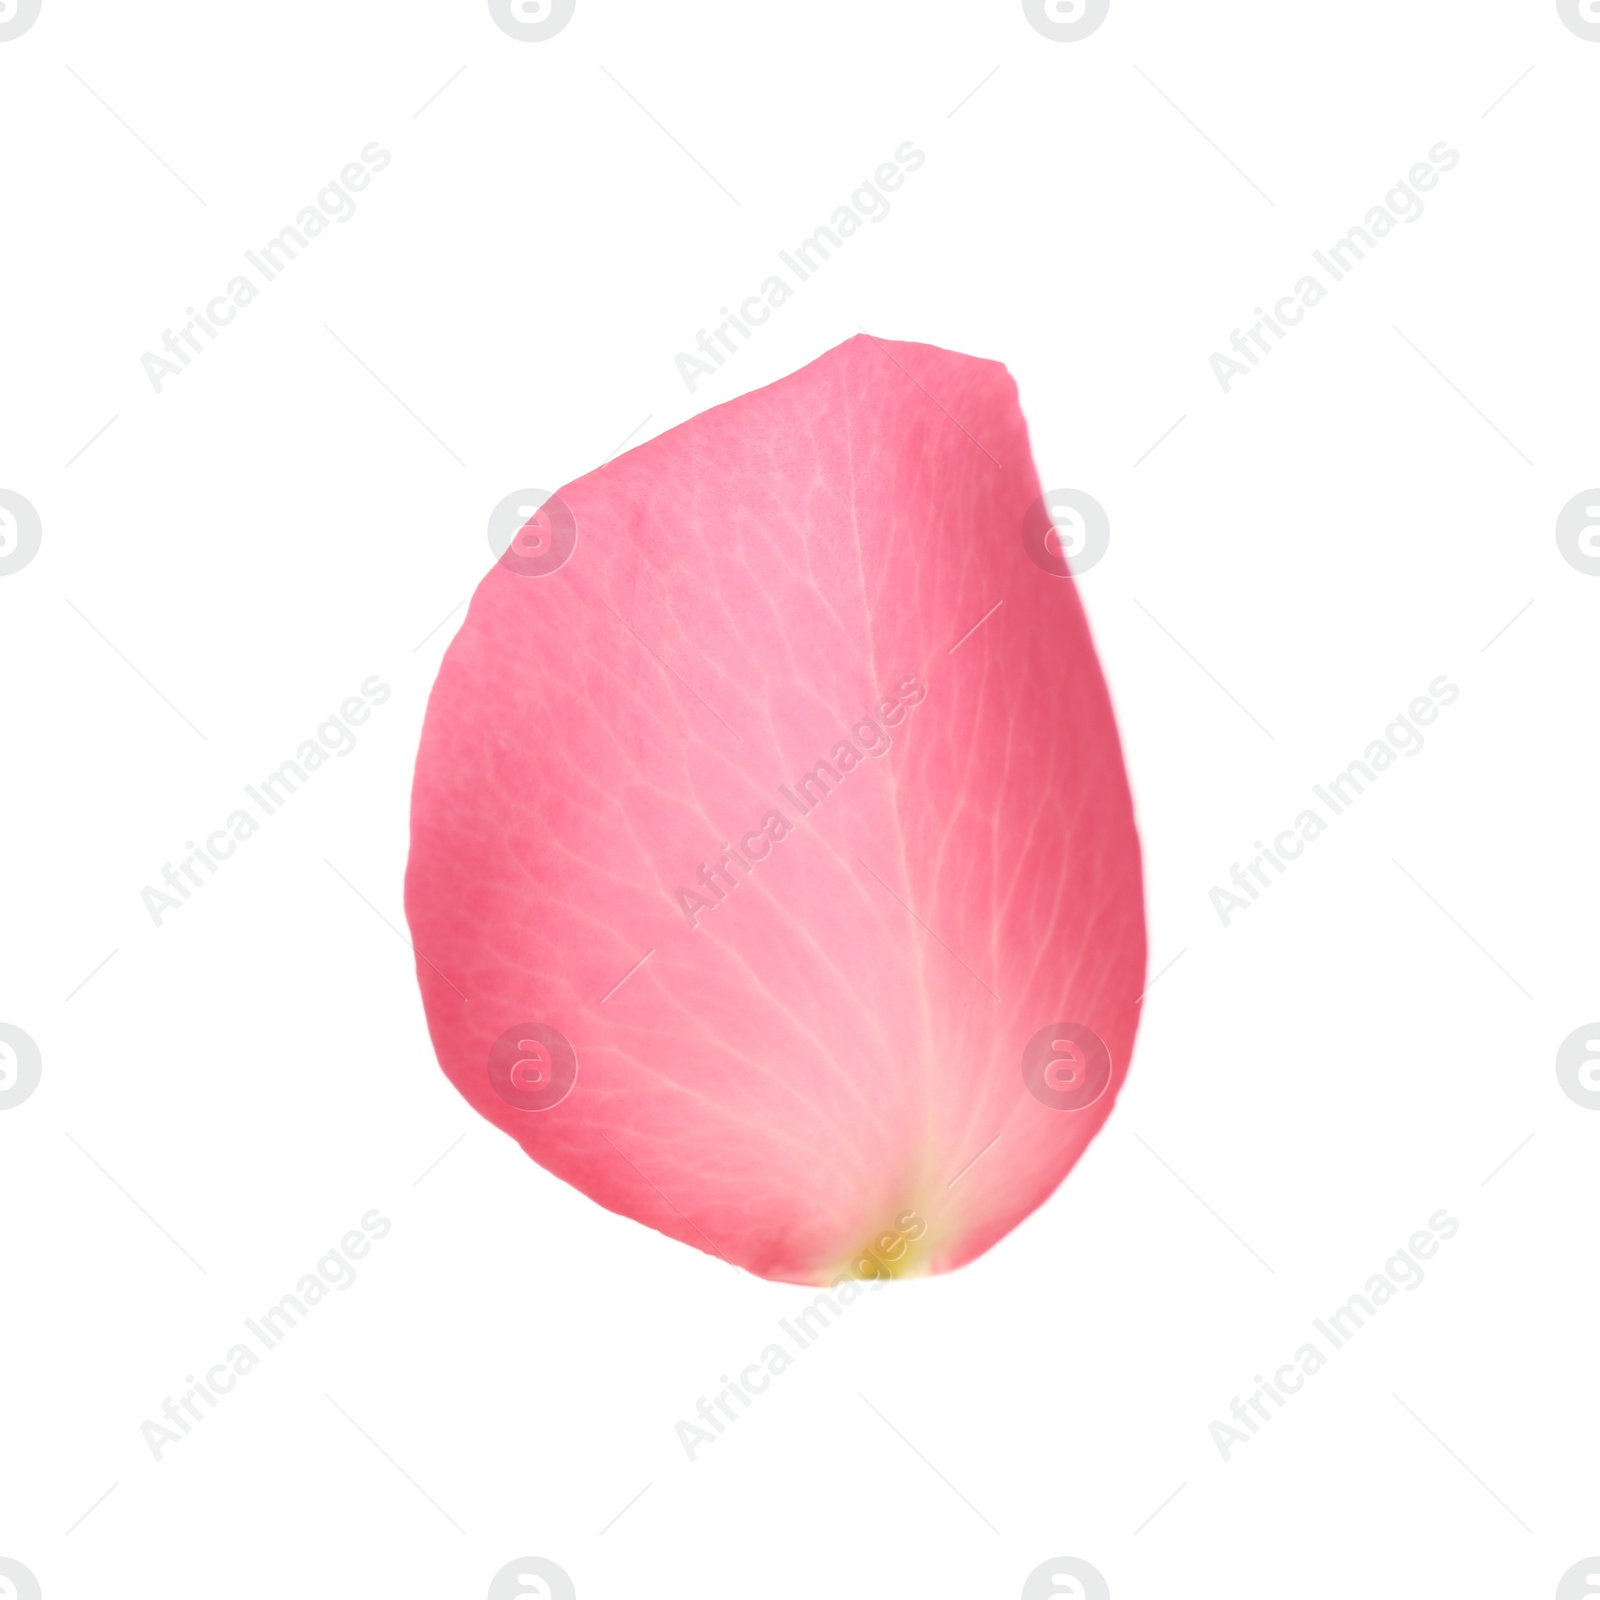 Photo of Fresh pink rose petal isolated on white